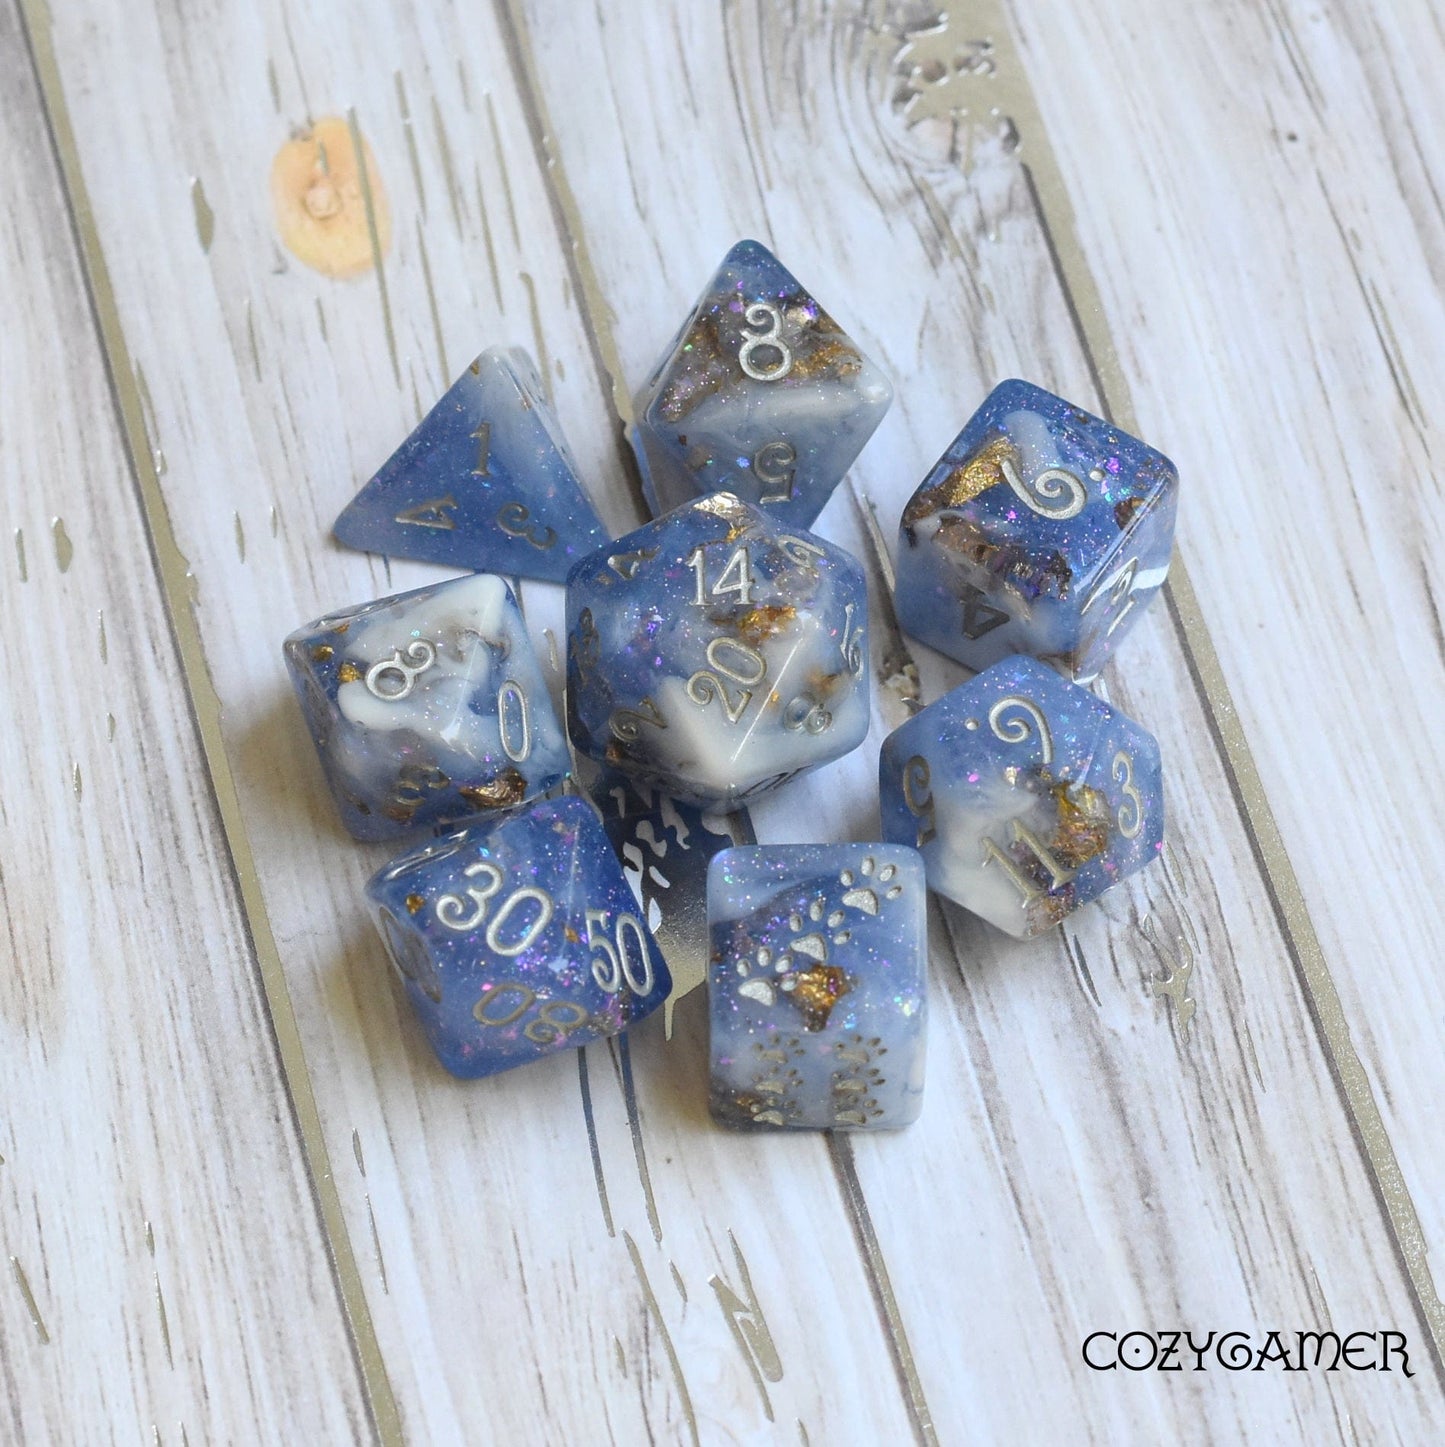 Snow Peak Dice Set. Clear Periwinkle and White Marble, with Glitter and Foil 8 Piece Set